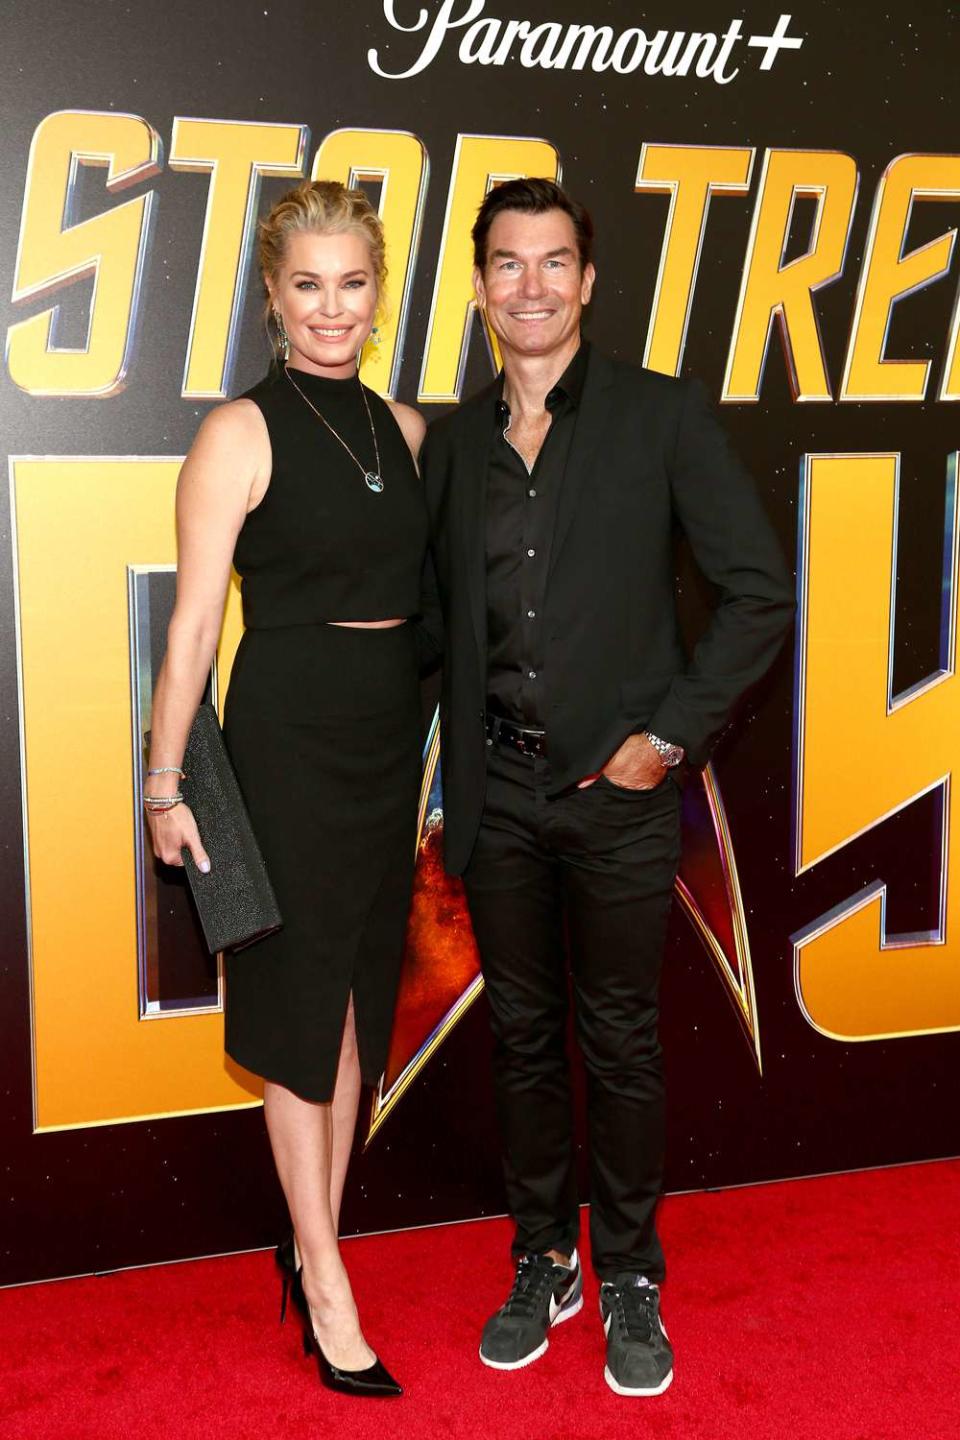 Rebecca Romijn and Jerry O'Connell attend the Paramount+'s 2nd Annual "Star Trek Day" Celebration at Skirball Cultural Center on September 08, 2021 in Los Angeles, California.